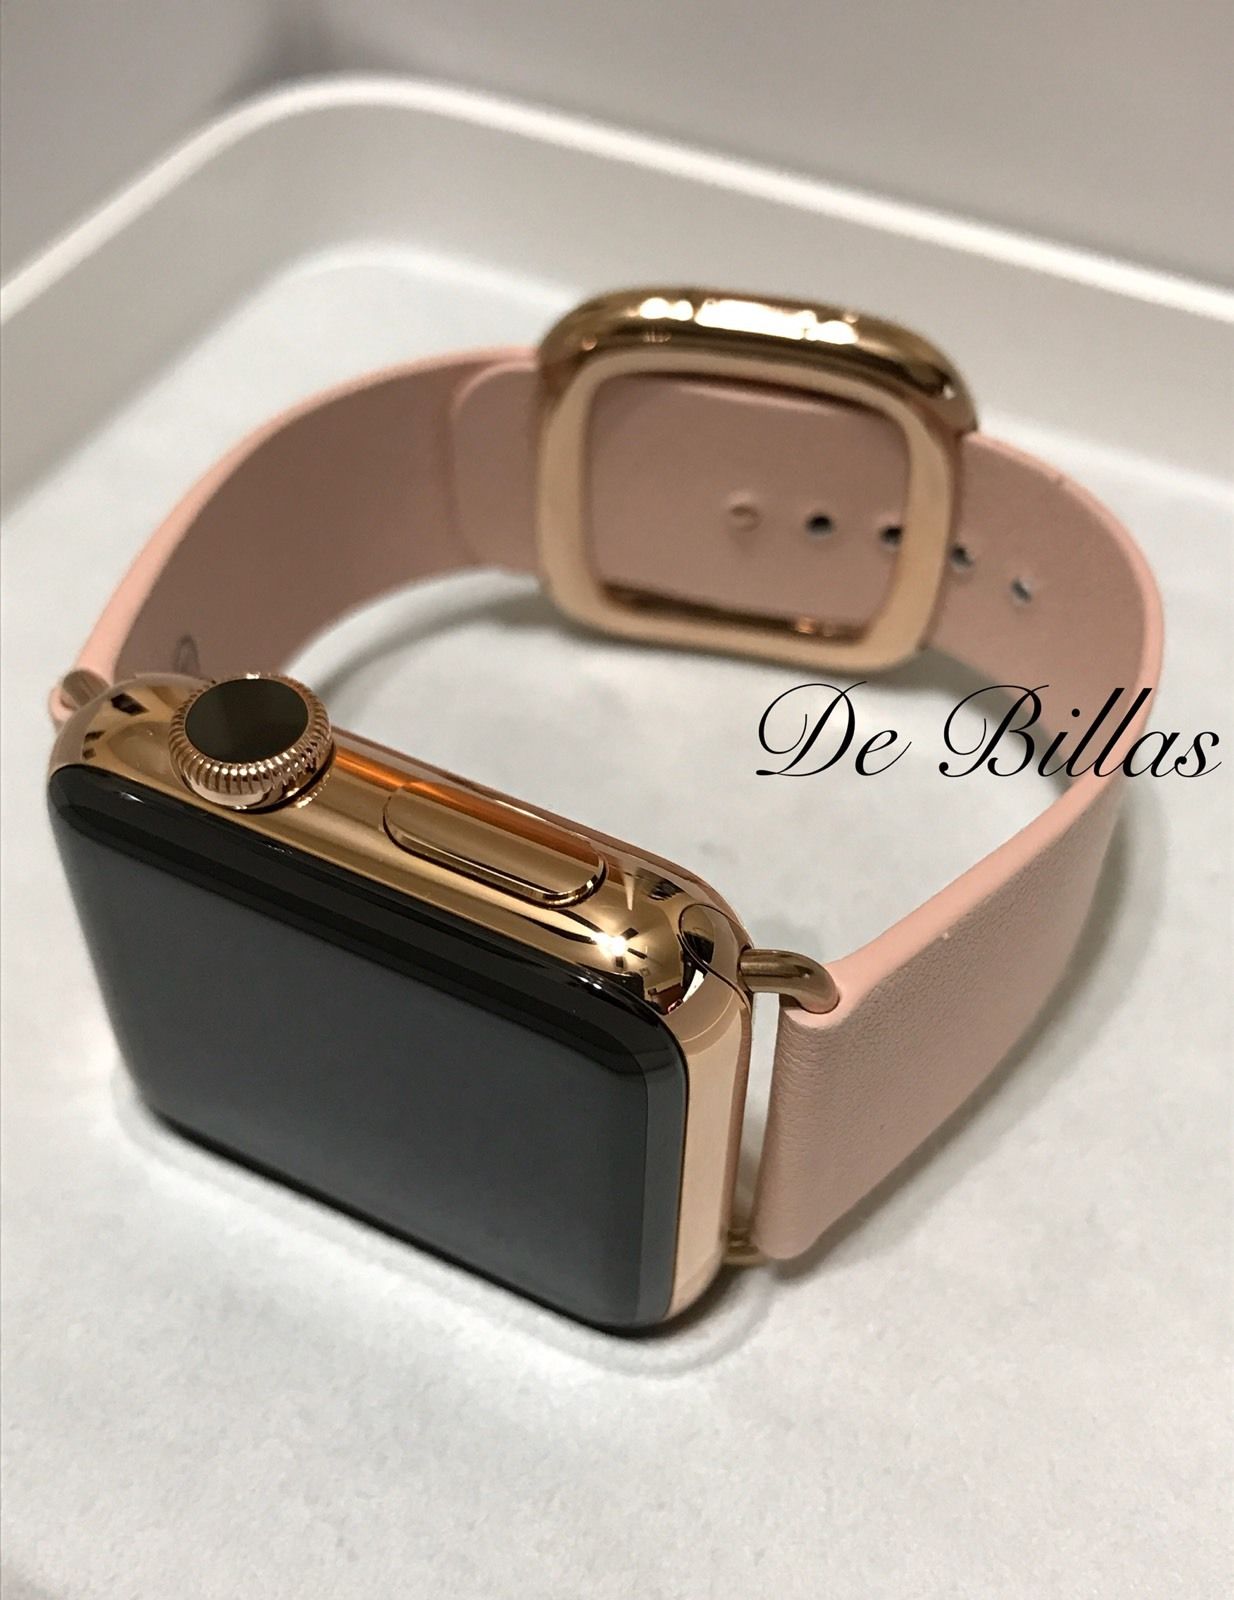 24K Rose Gold Plated 38mm Iwatch, Series 1 with Rose Modern Band - image 1 of 3